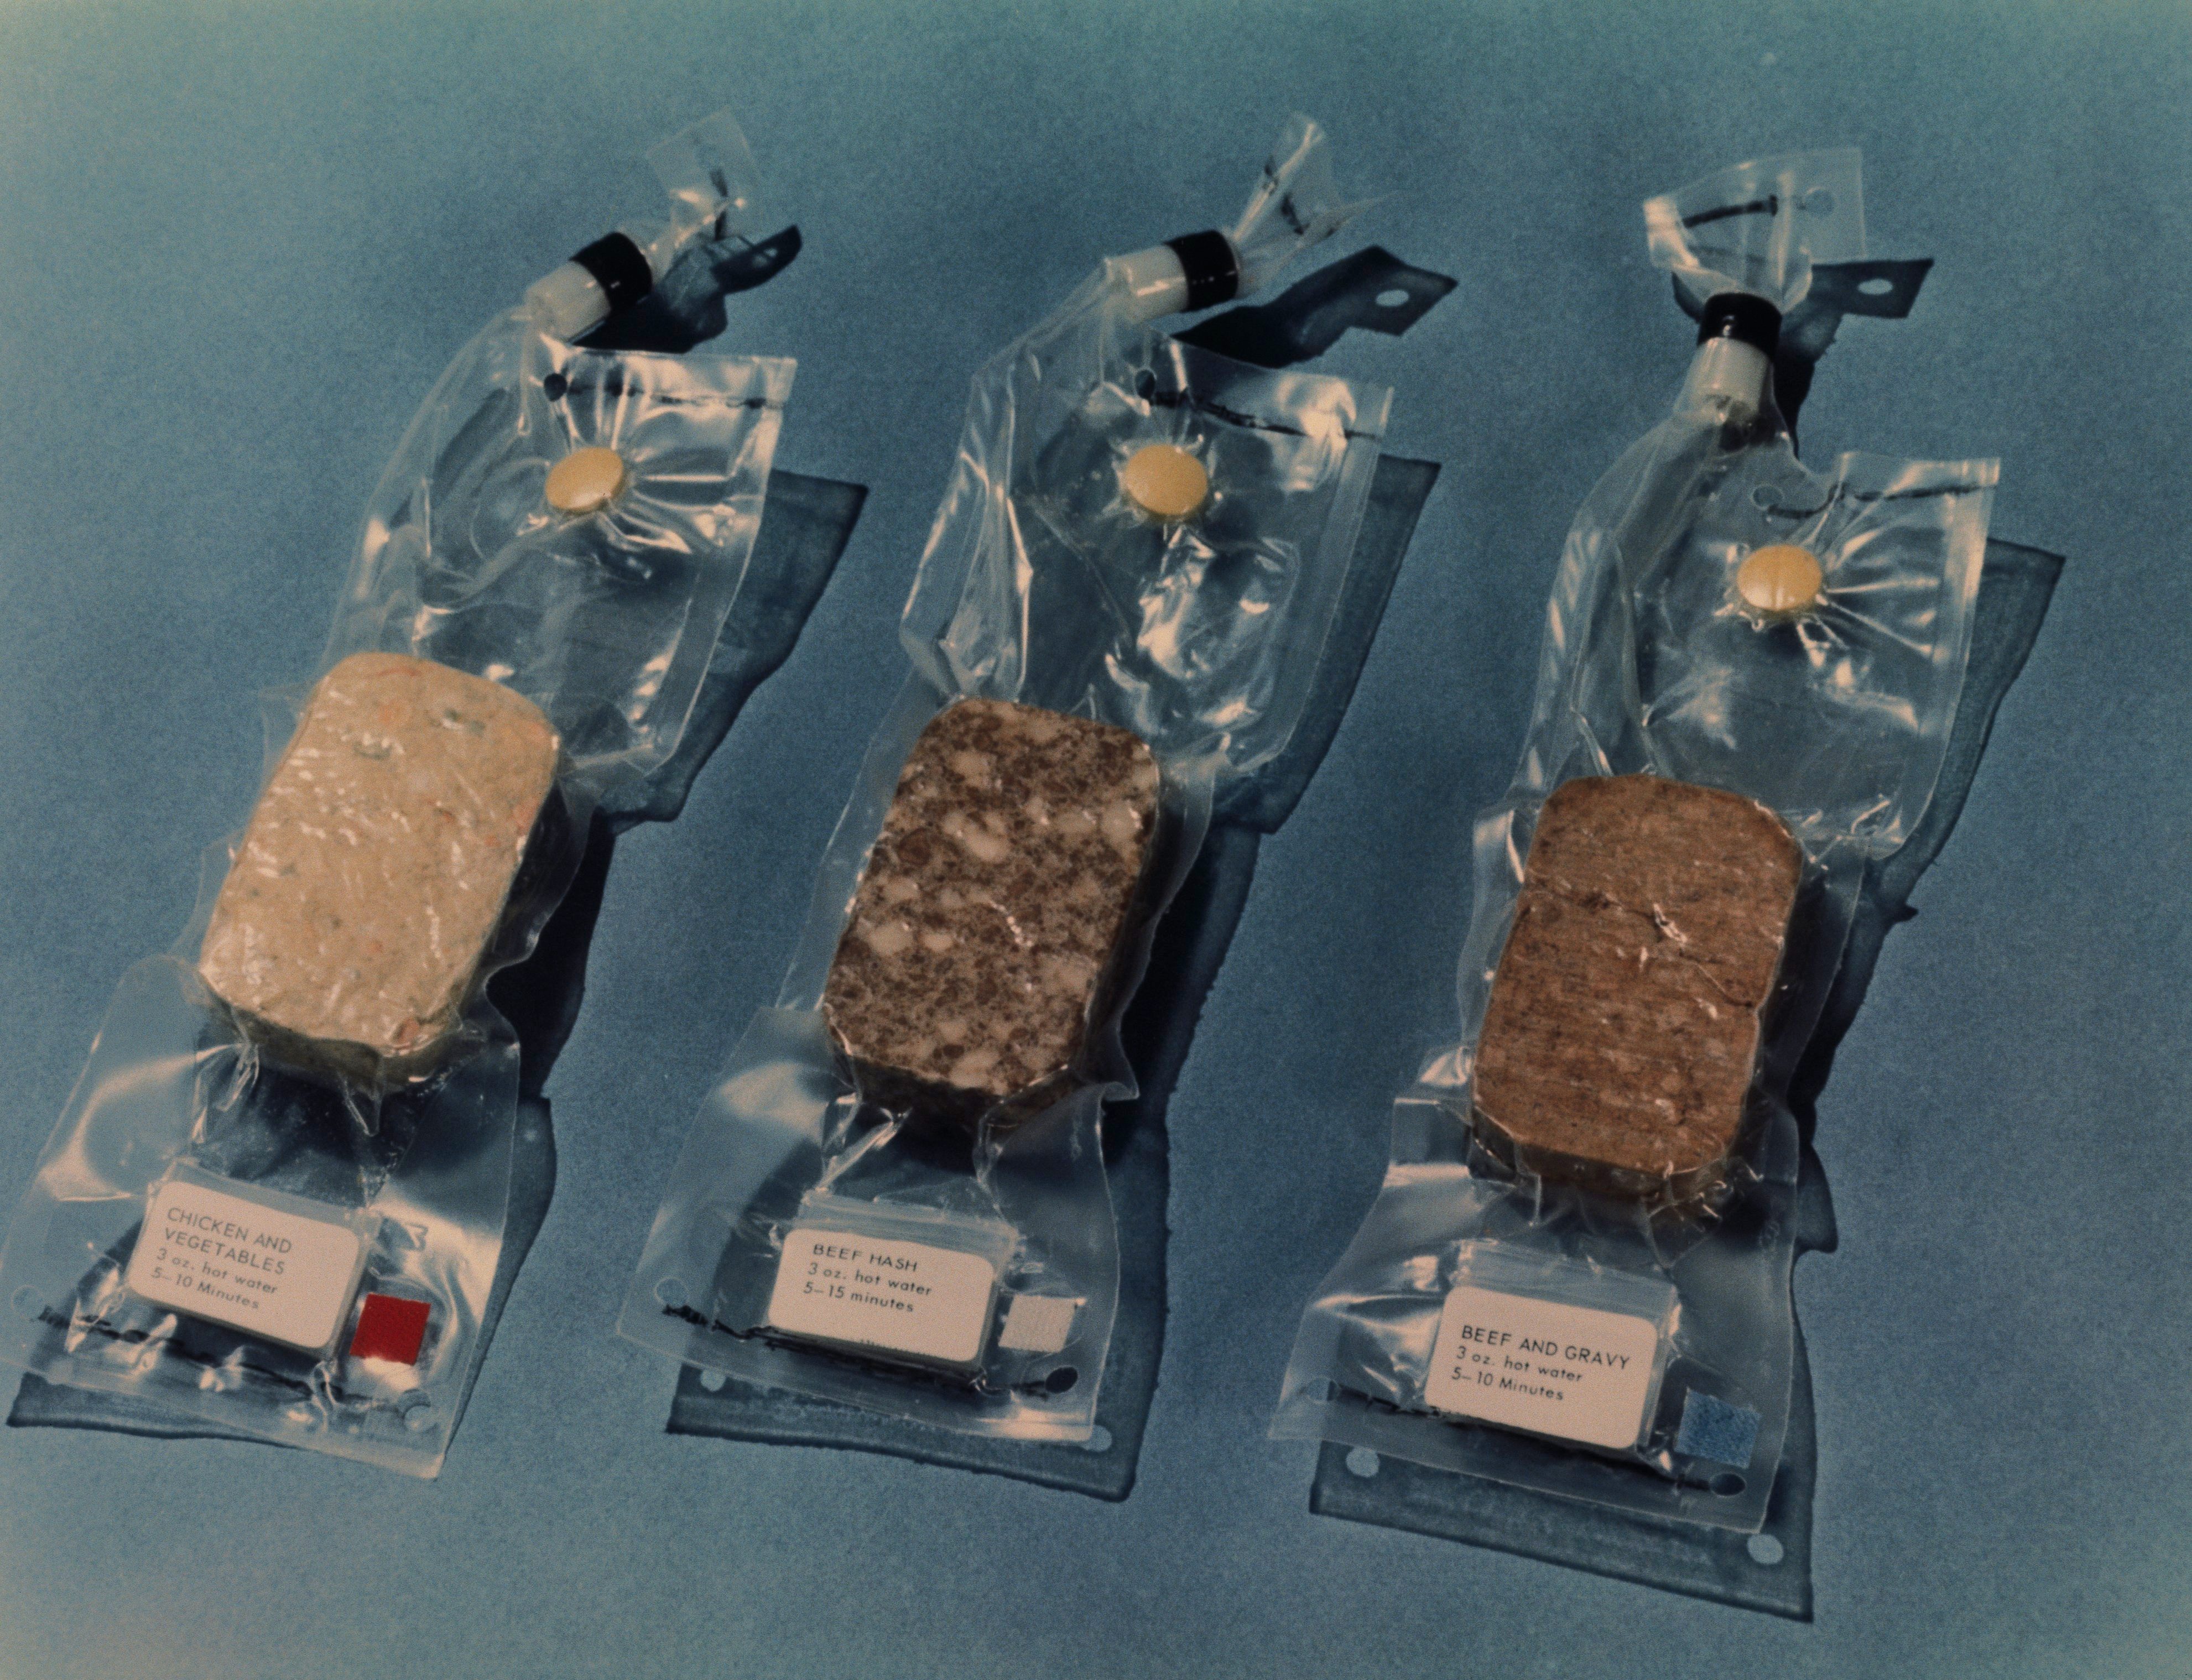 Space Food for Astronauts